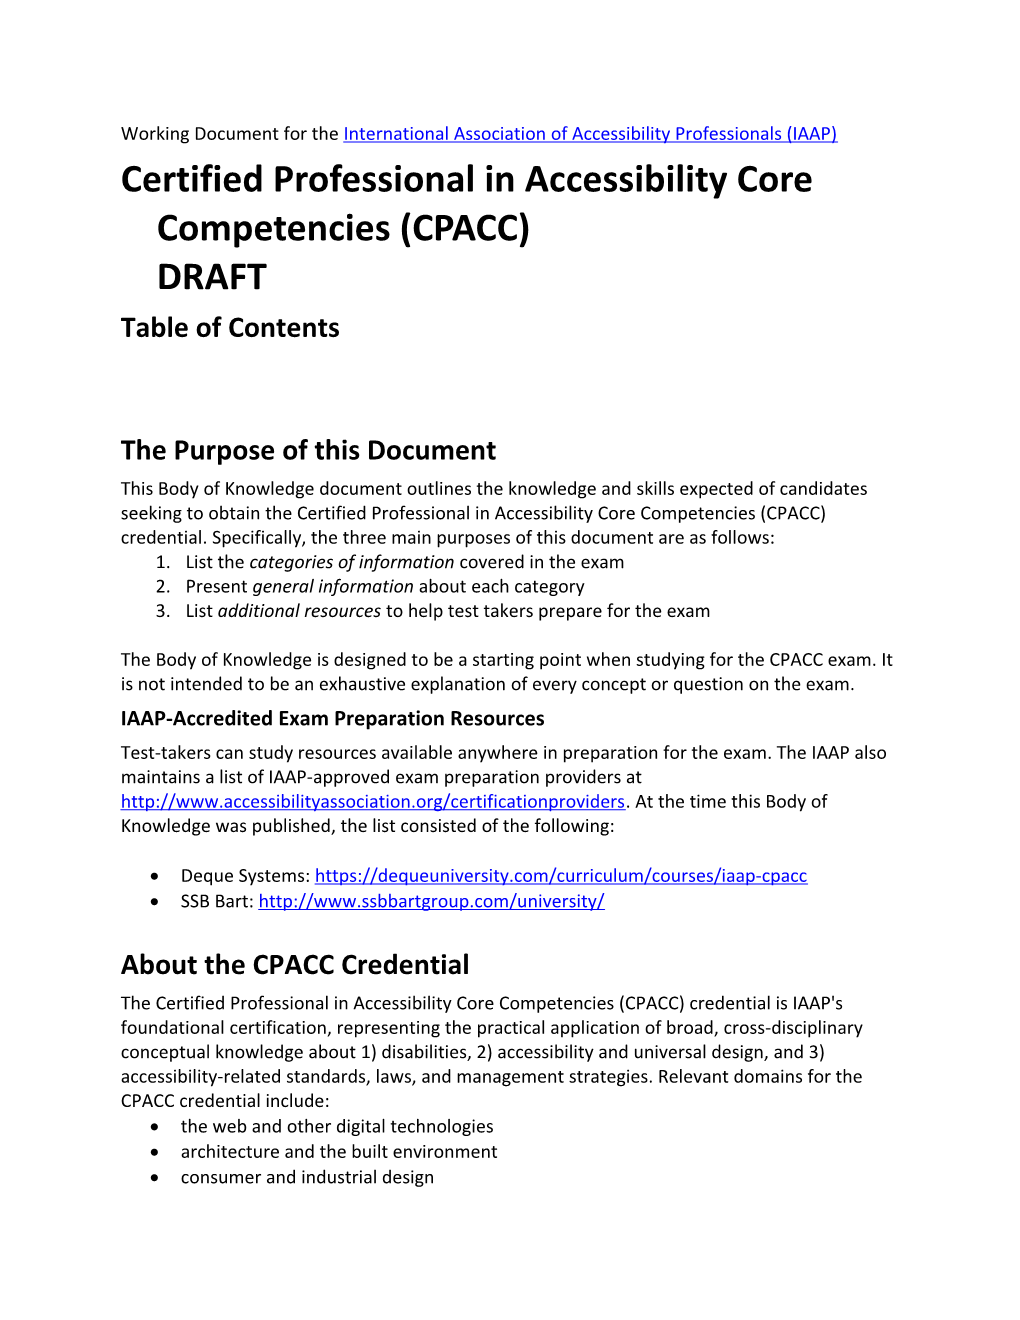 Certified Professional in Accessibility Core Competencies (CPACC)DRAFT